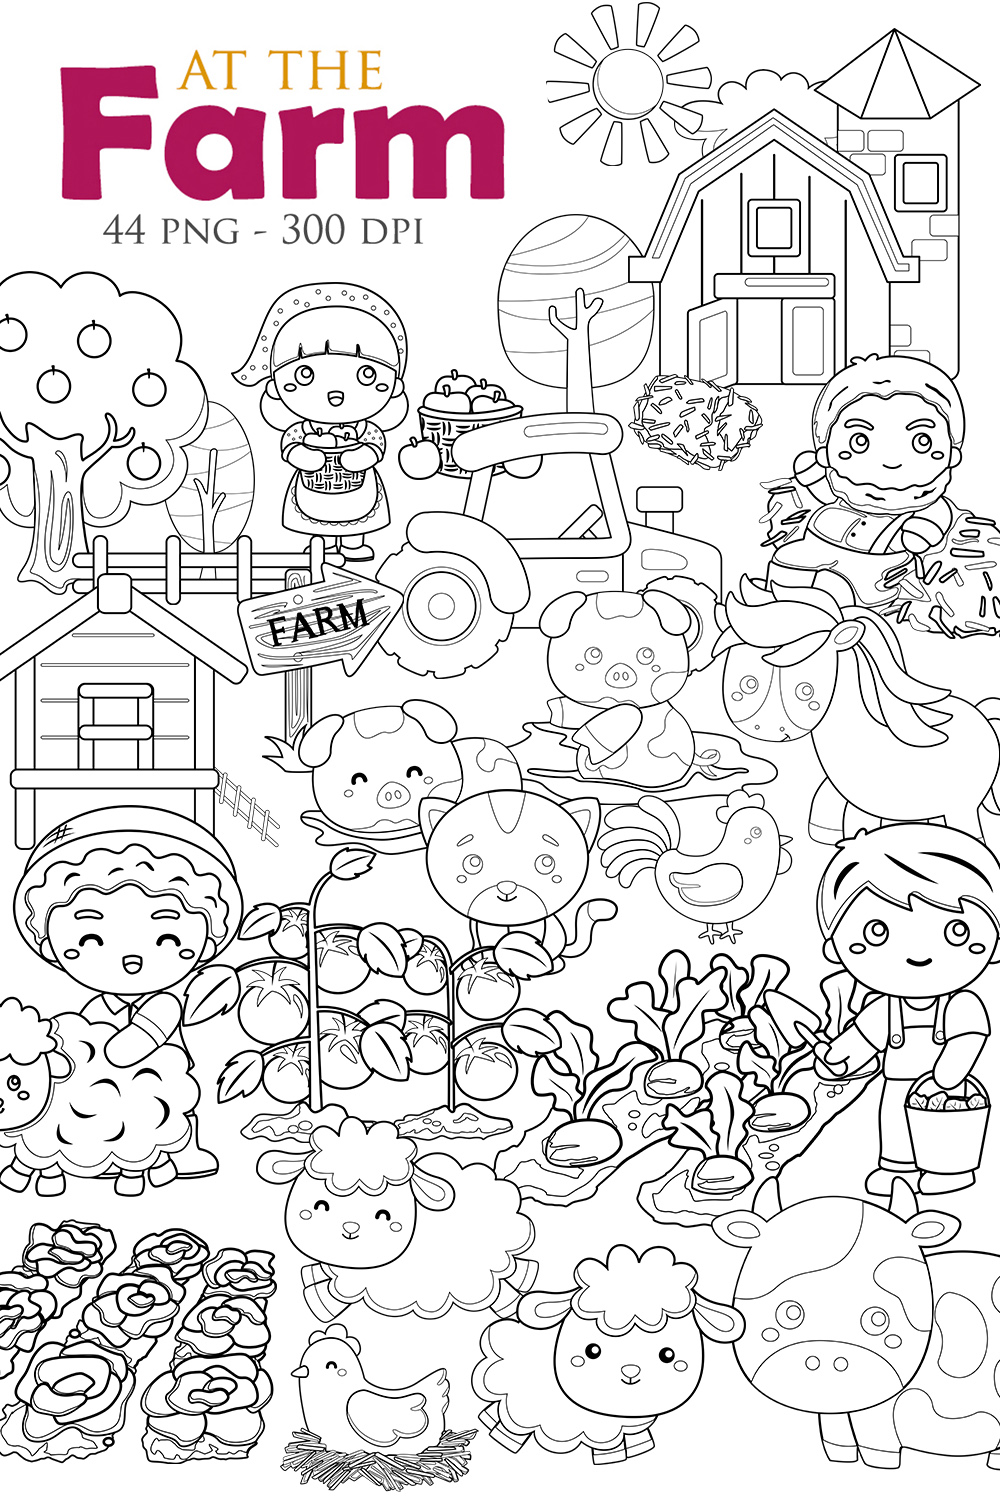 Bundles Art Family Activity At The Farm with Kids Parents Animals Farmer House Barn Cow Chicken Horse Harvesting Vegetables Plants Cartoon Digital Stamp Outline Black and White pinterest preview image.